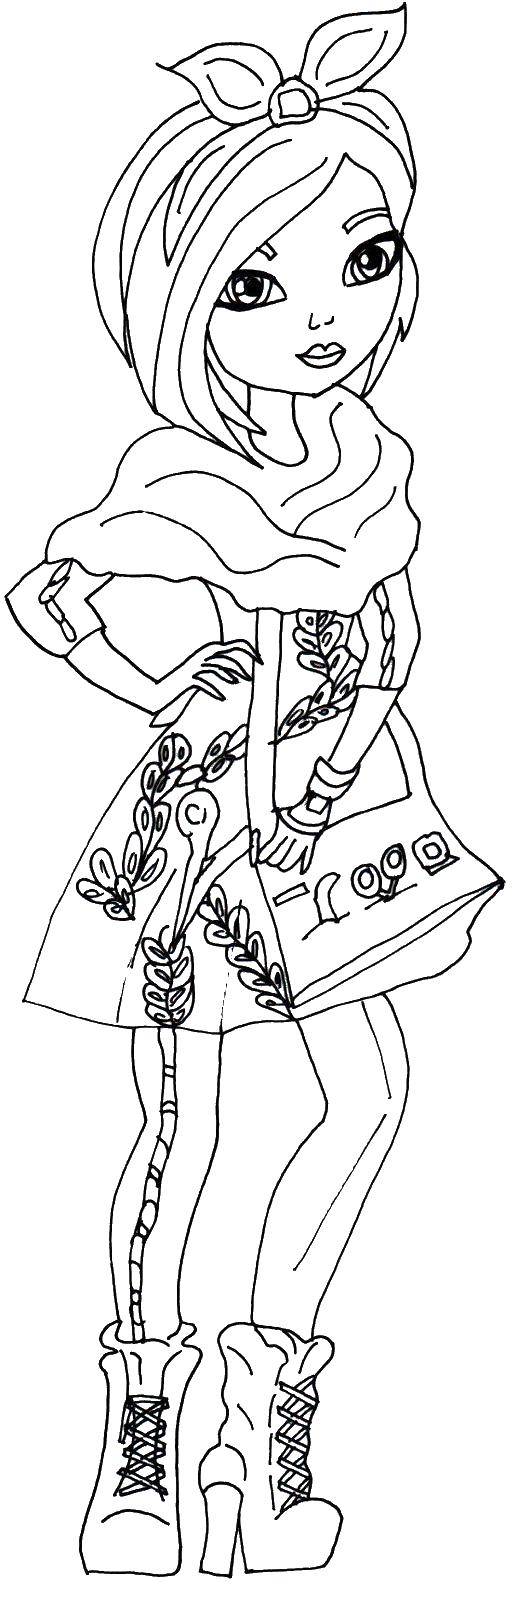 Coloring Beautiful girl. Category coloring pages for girls. Tags:  girl , outfit, for girls.